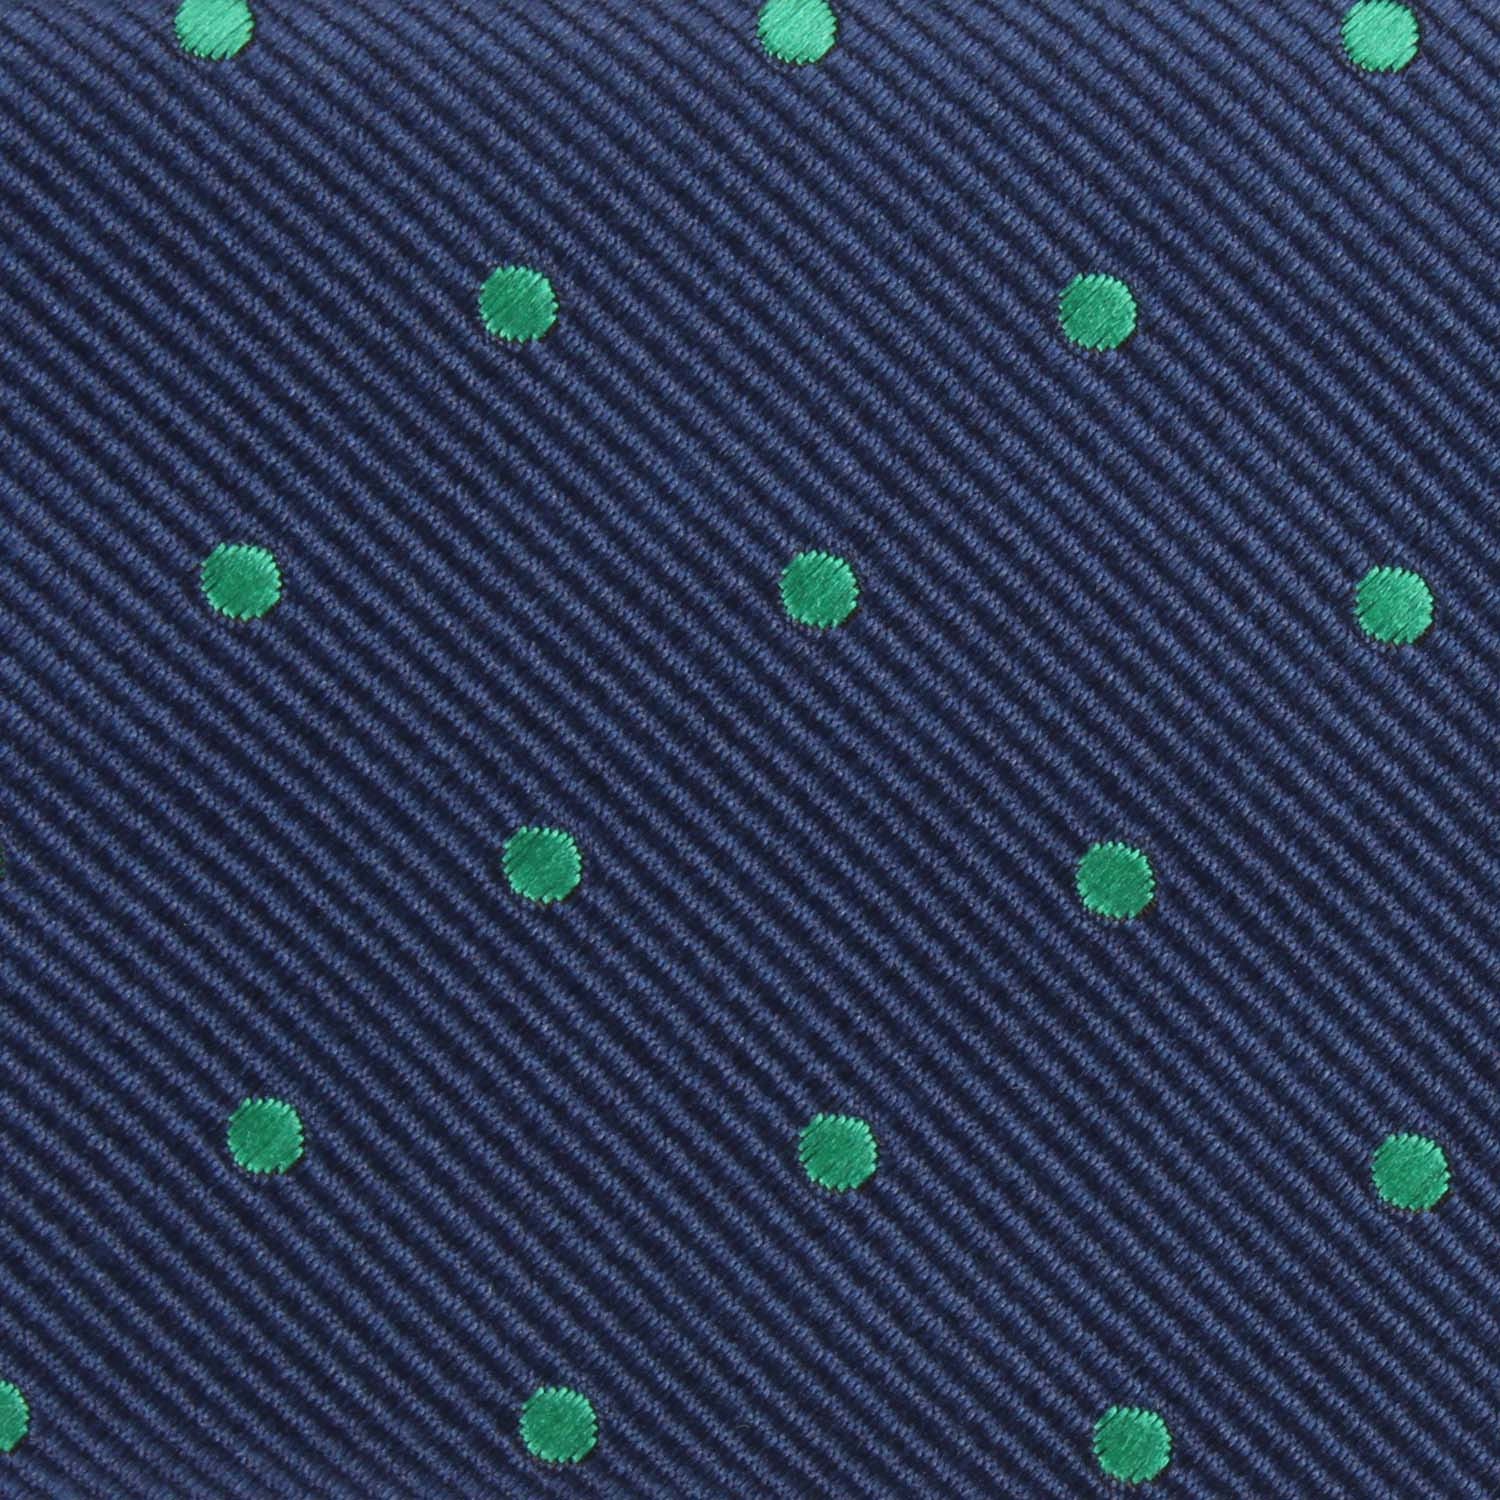 Navy Blue with Green Polka Dots Fabric Necktie M130